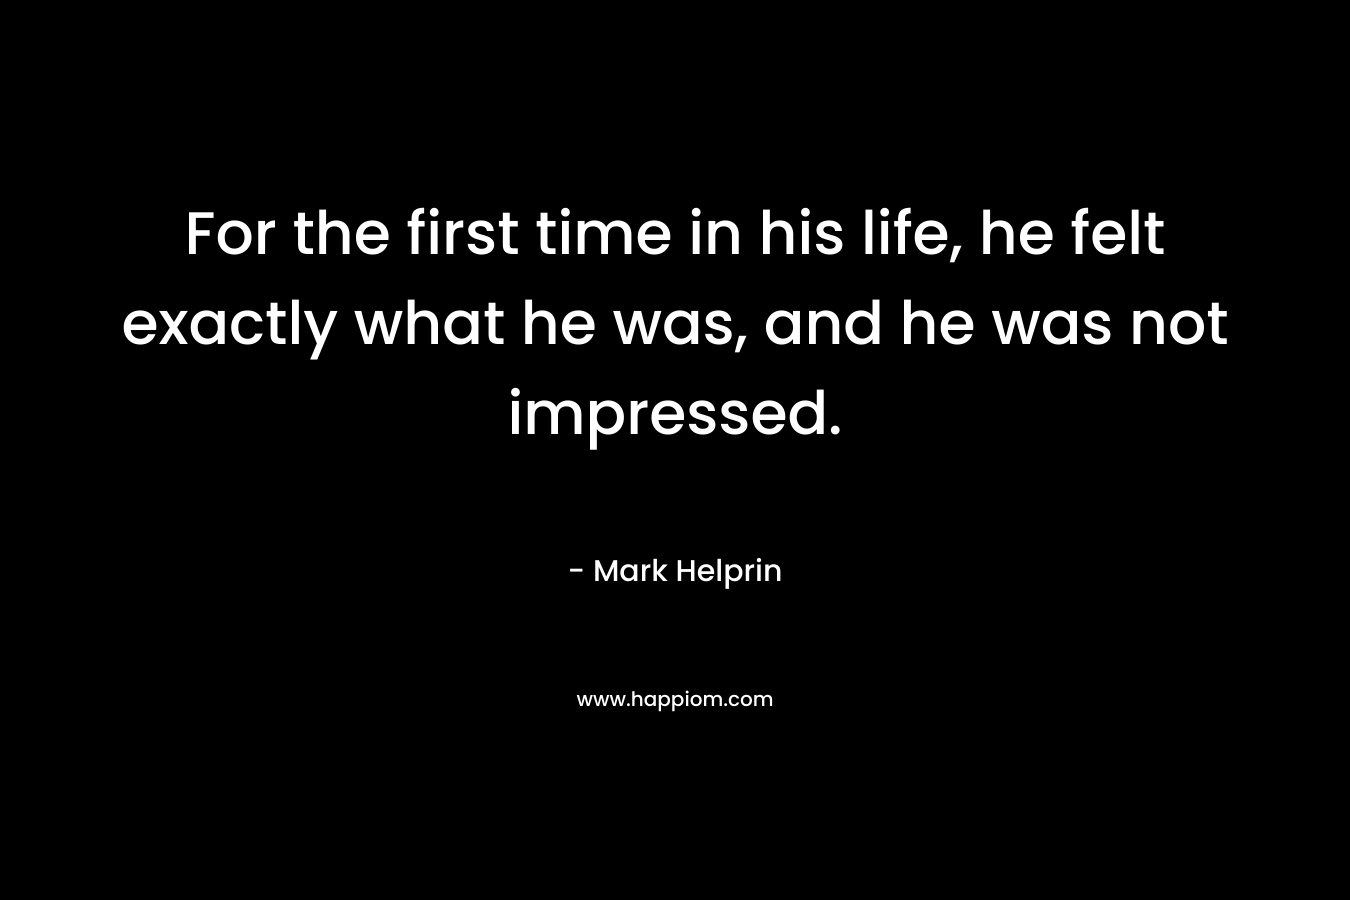 For the first time in his life, he felt exactly what he was, and he was not impressed. – Mark Helprin